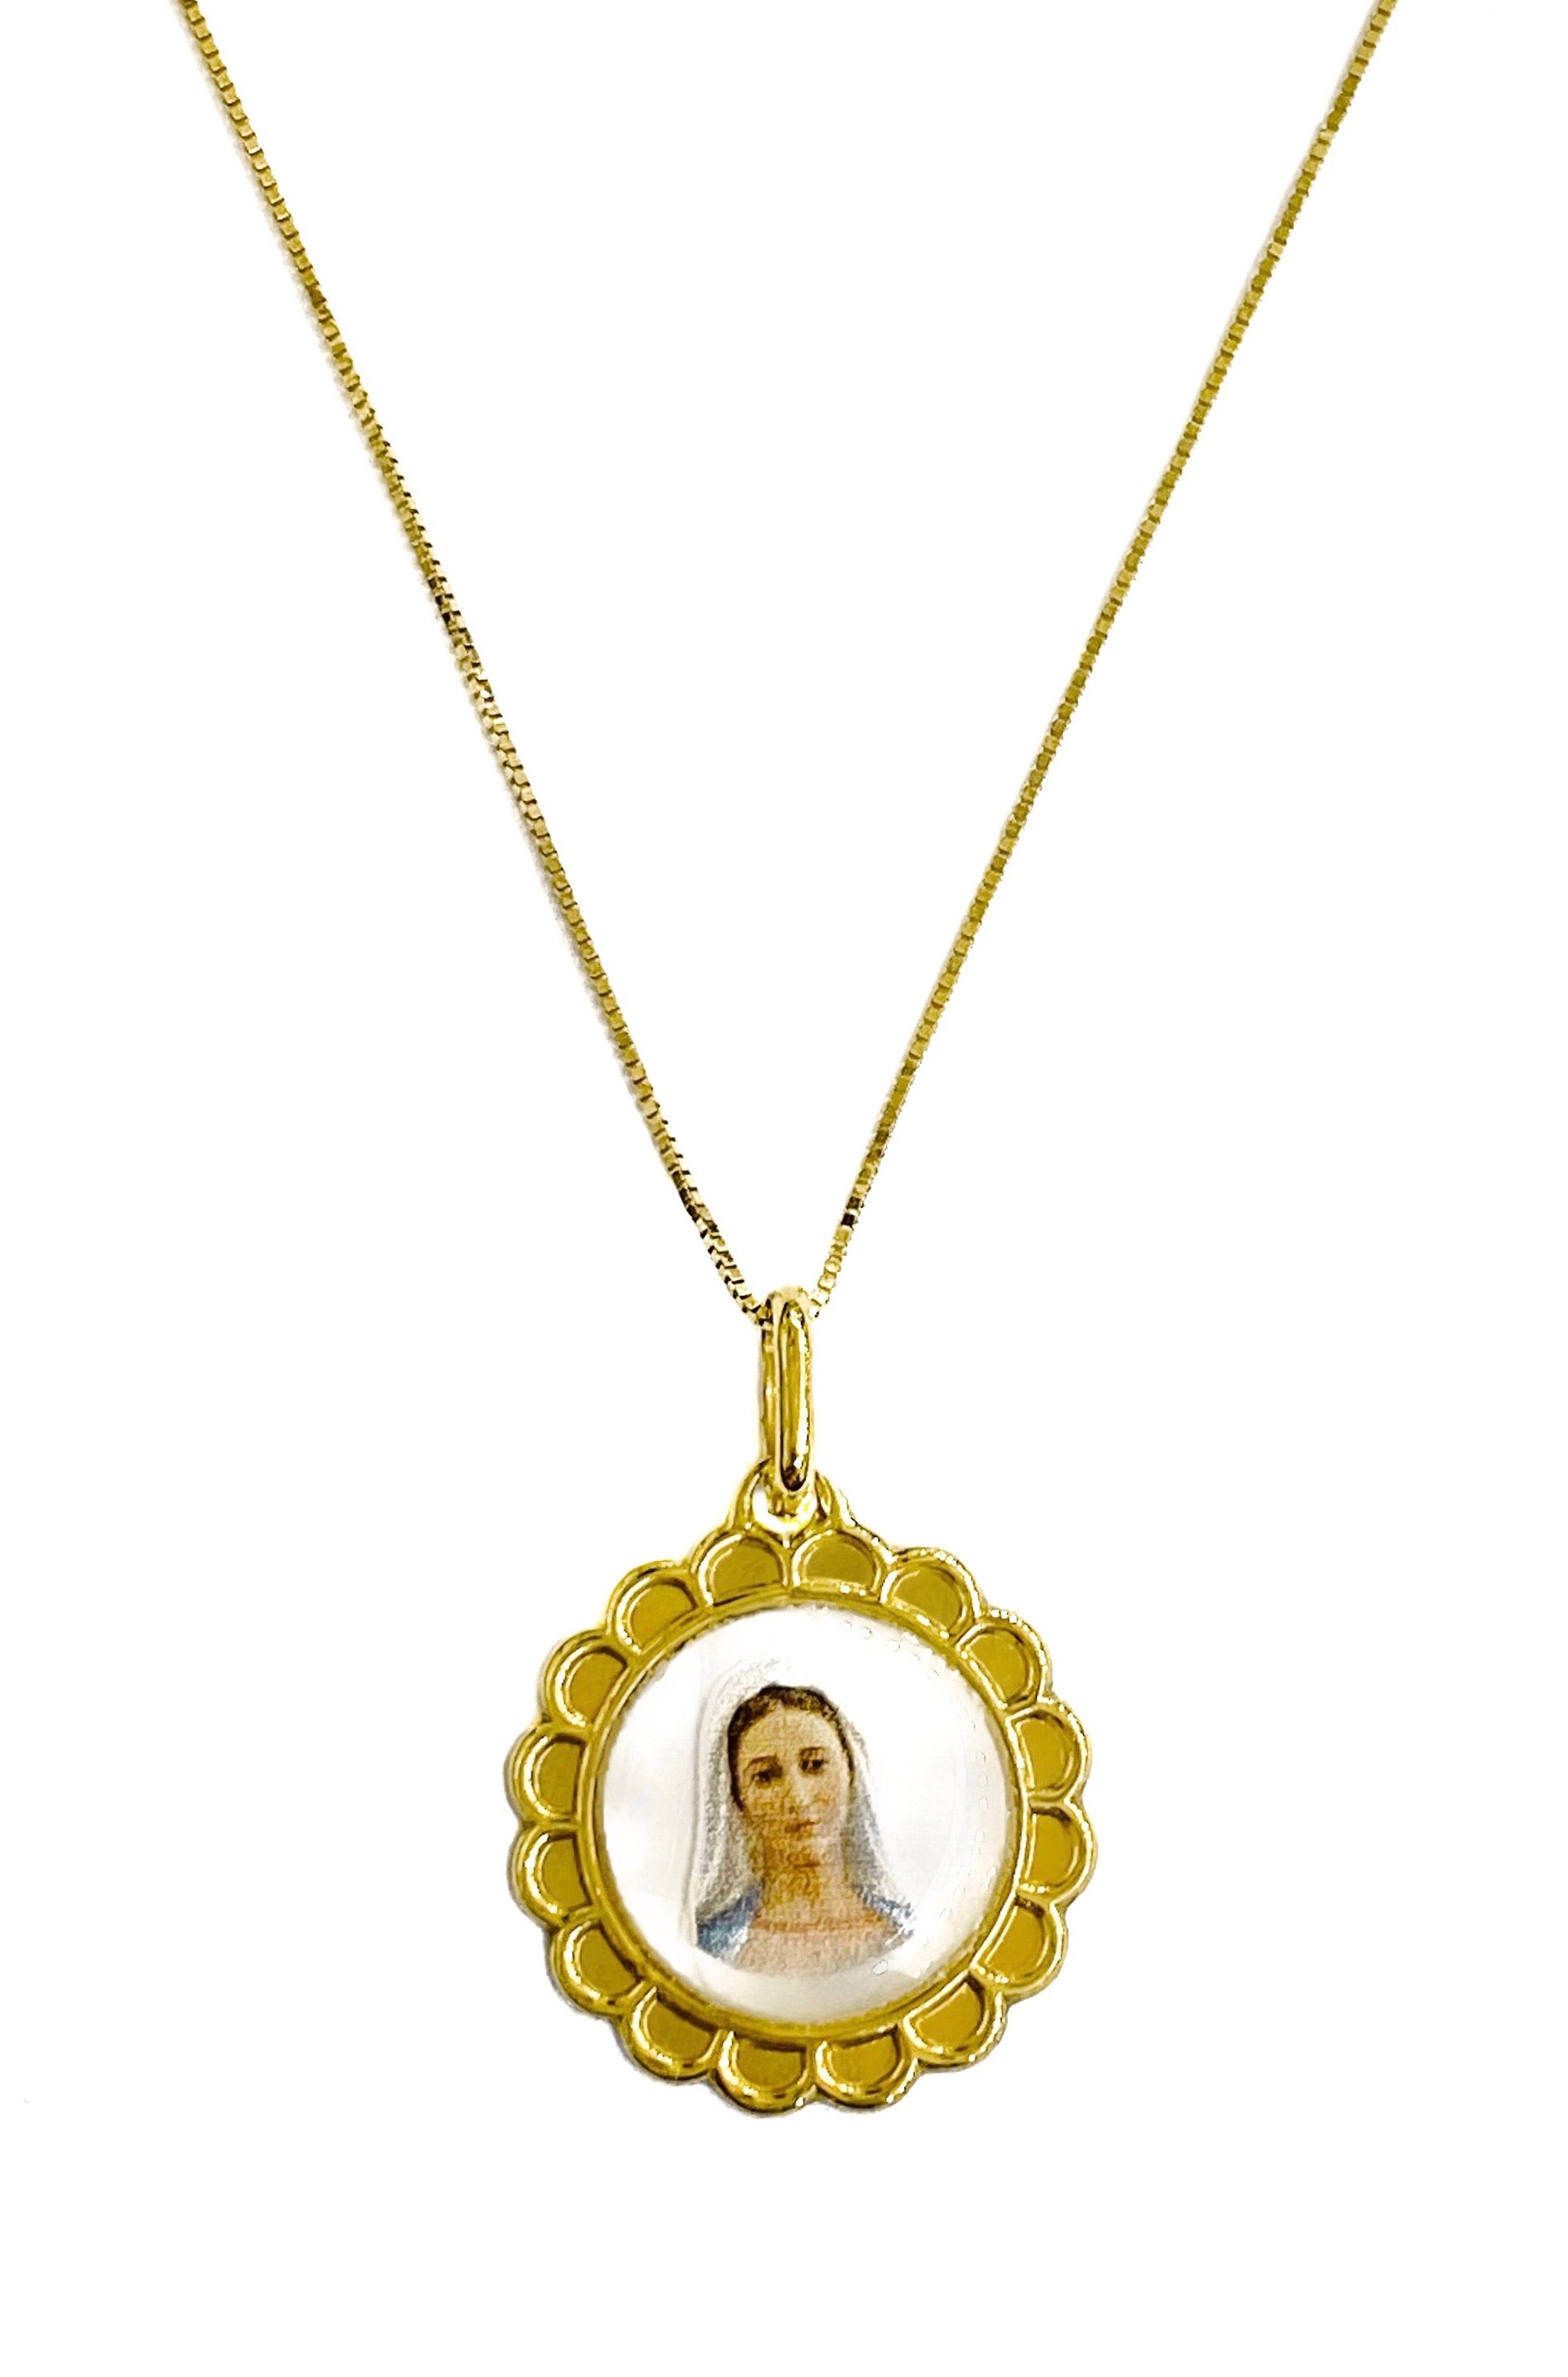 14K YELLOW GOLD MOTHER OF JESUS NECKLACE